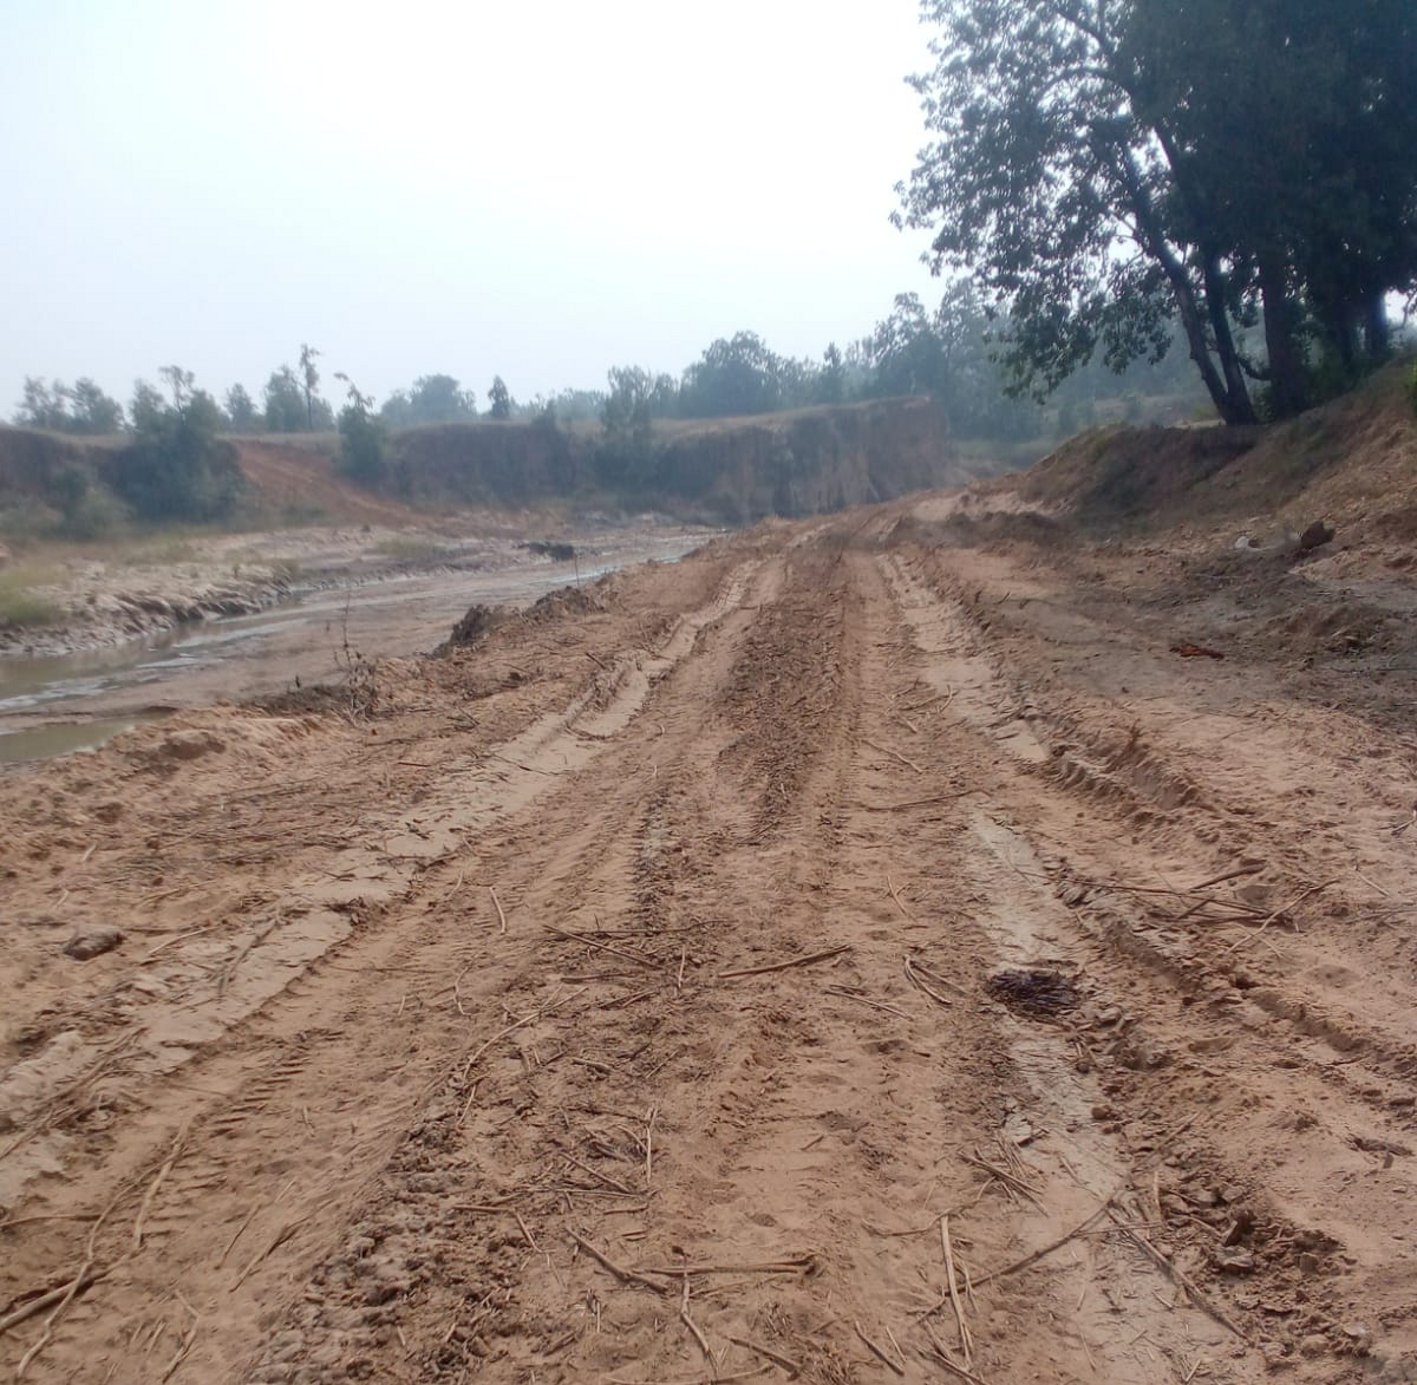 Illegal mining and transportation of sand happening in Bandhavgarh Tiger Reserve area